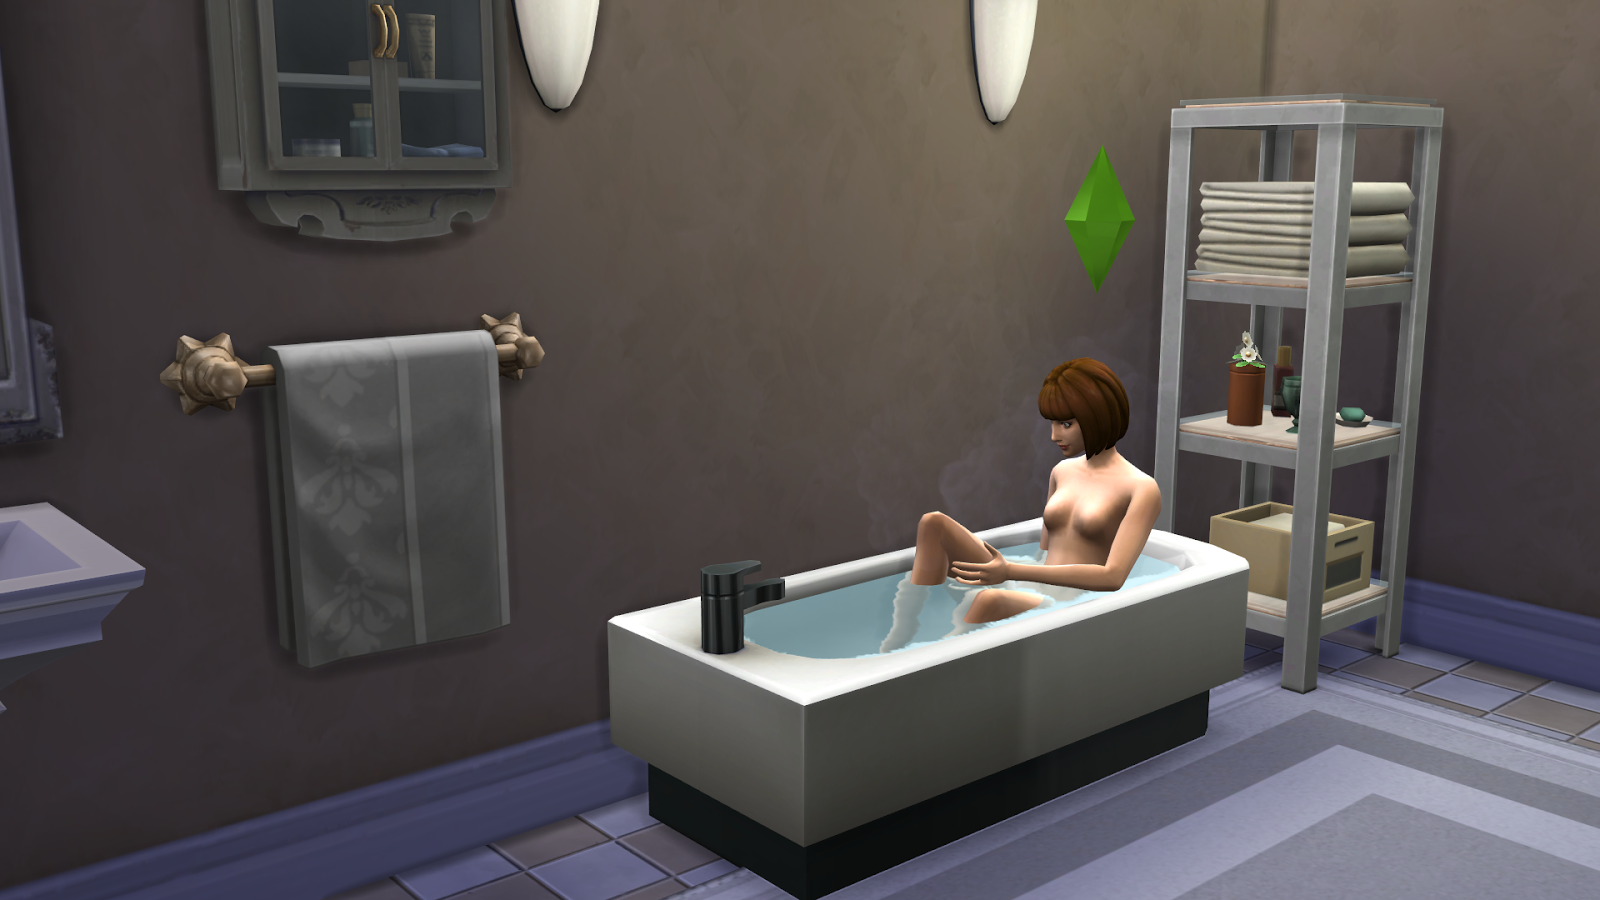 The sims2 naked patch cartoon babe